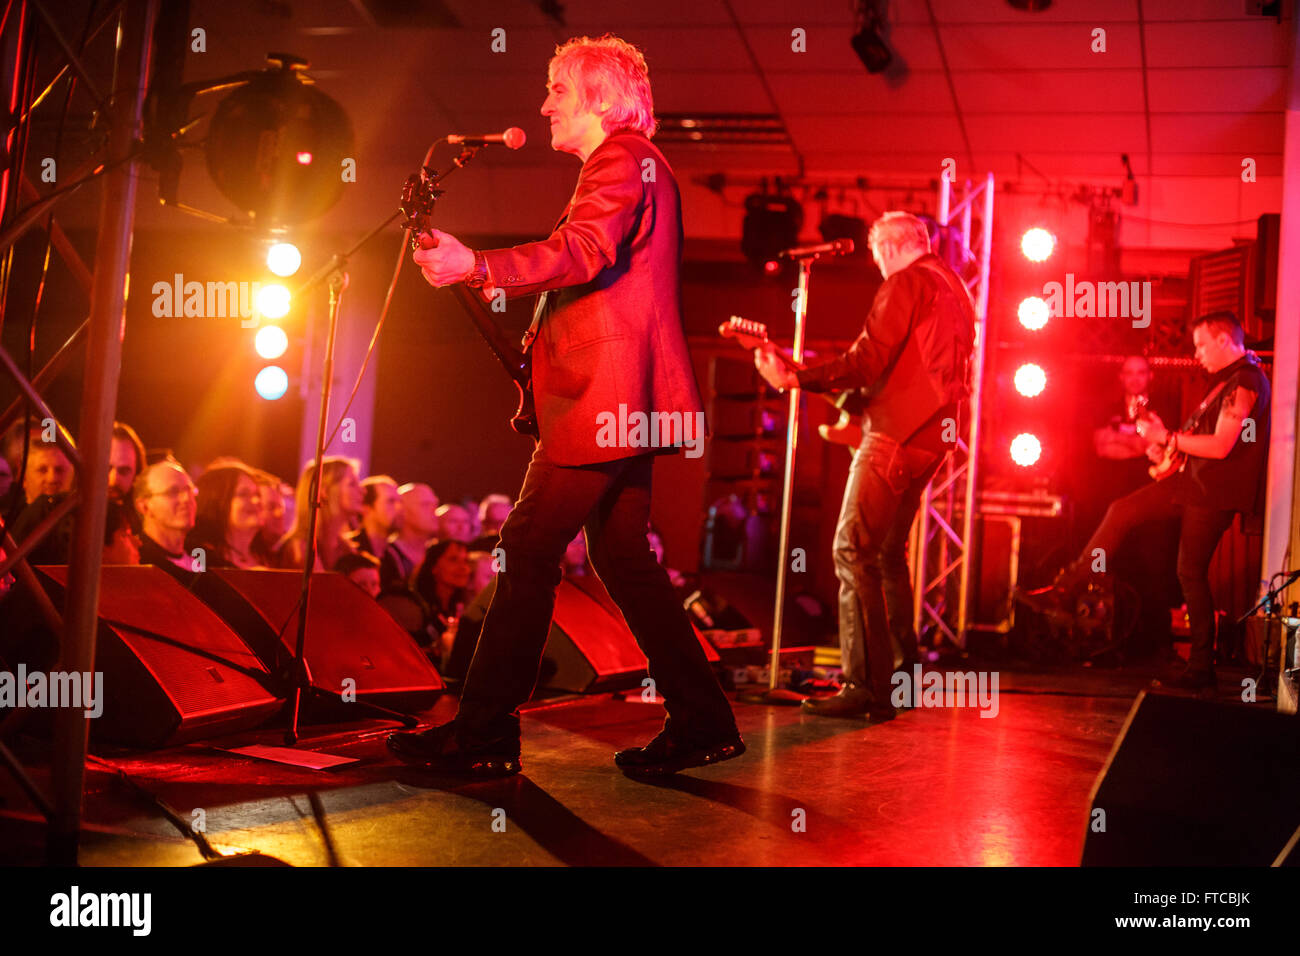 Nantwich, Cheshire, UK. 26th March, 2016. FM perform live at the Nantwich Civic Hall during the Nantwich Jazz, Blues and Music Festival. Credit:  Simon Newbury/Alamy Live News Stock Photo